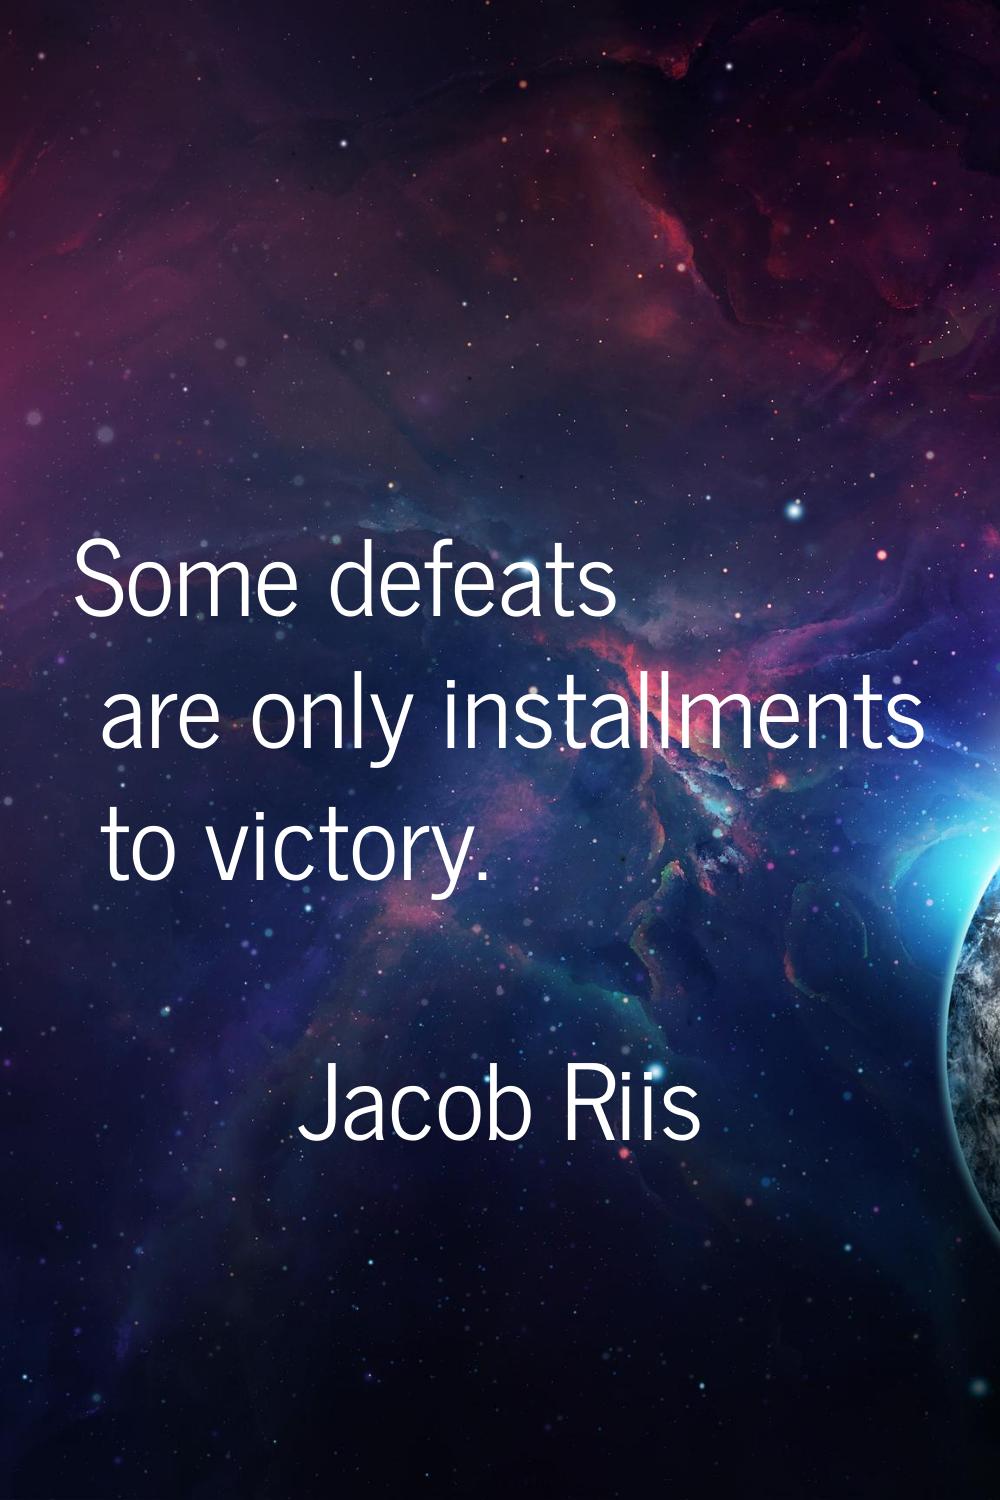 Some defeats are only installments to victory.